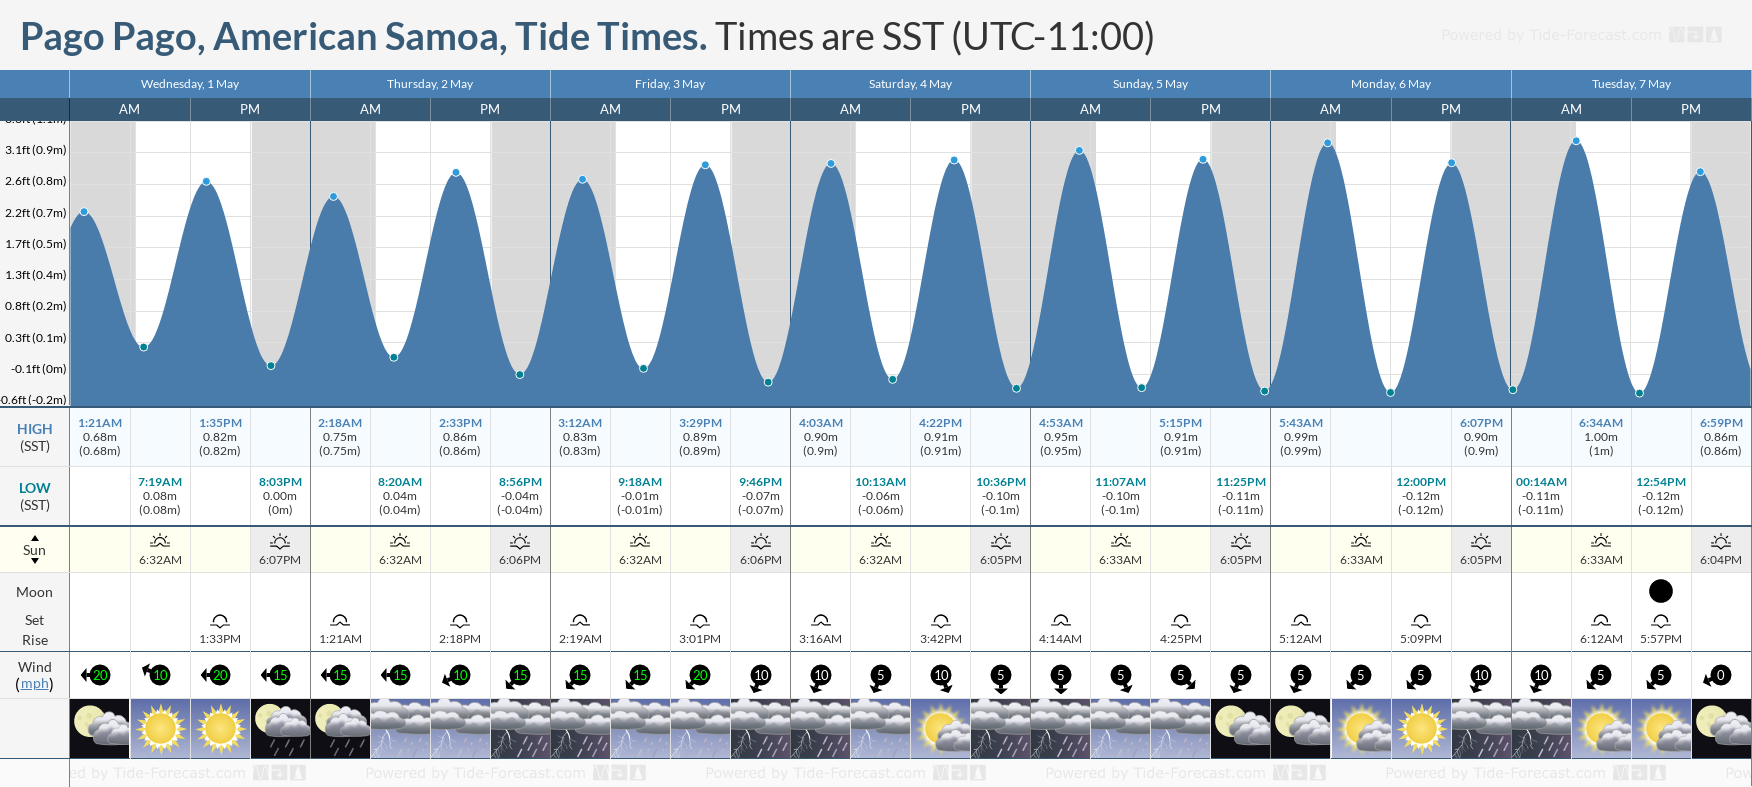 Pago Pago, American Samoa Tide Chart including high and low tide tide times for the next 7 days